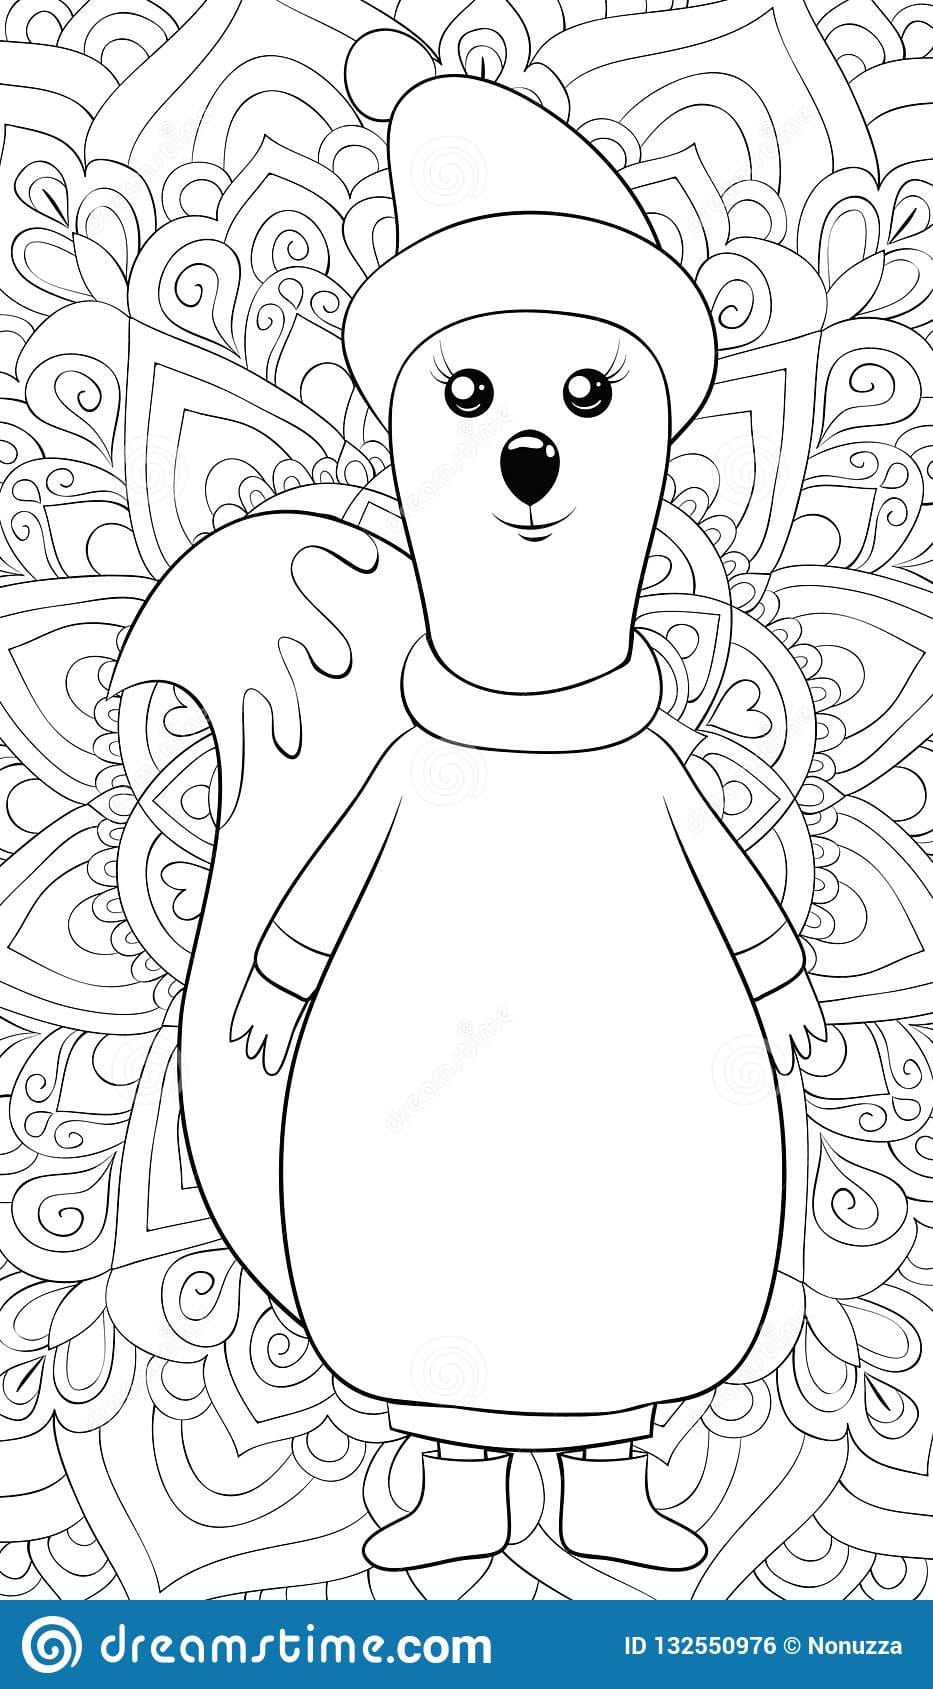 Cute Squirrel Image For Relaxing Activity Coloring Page